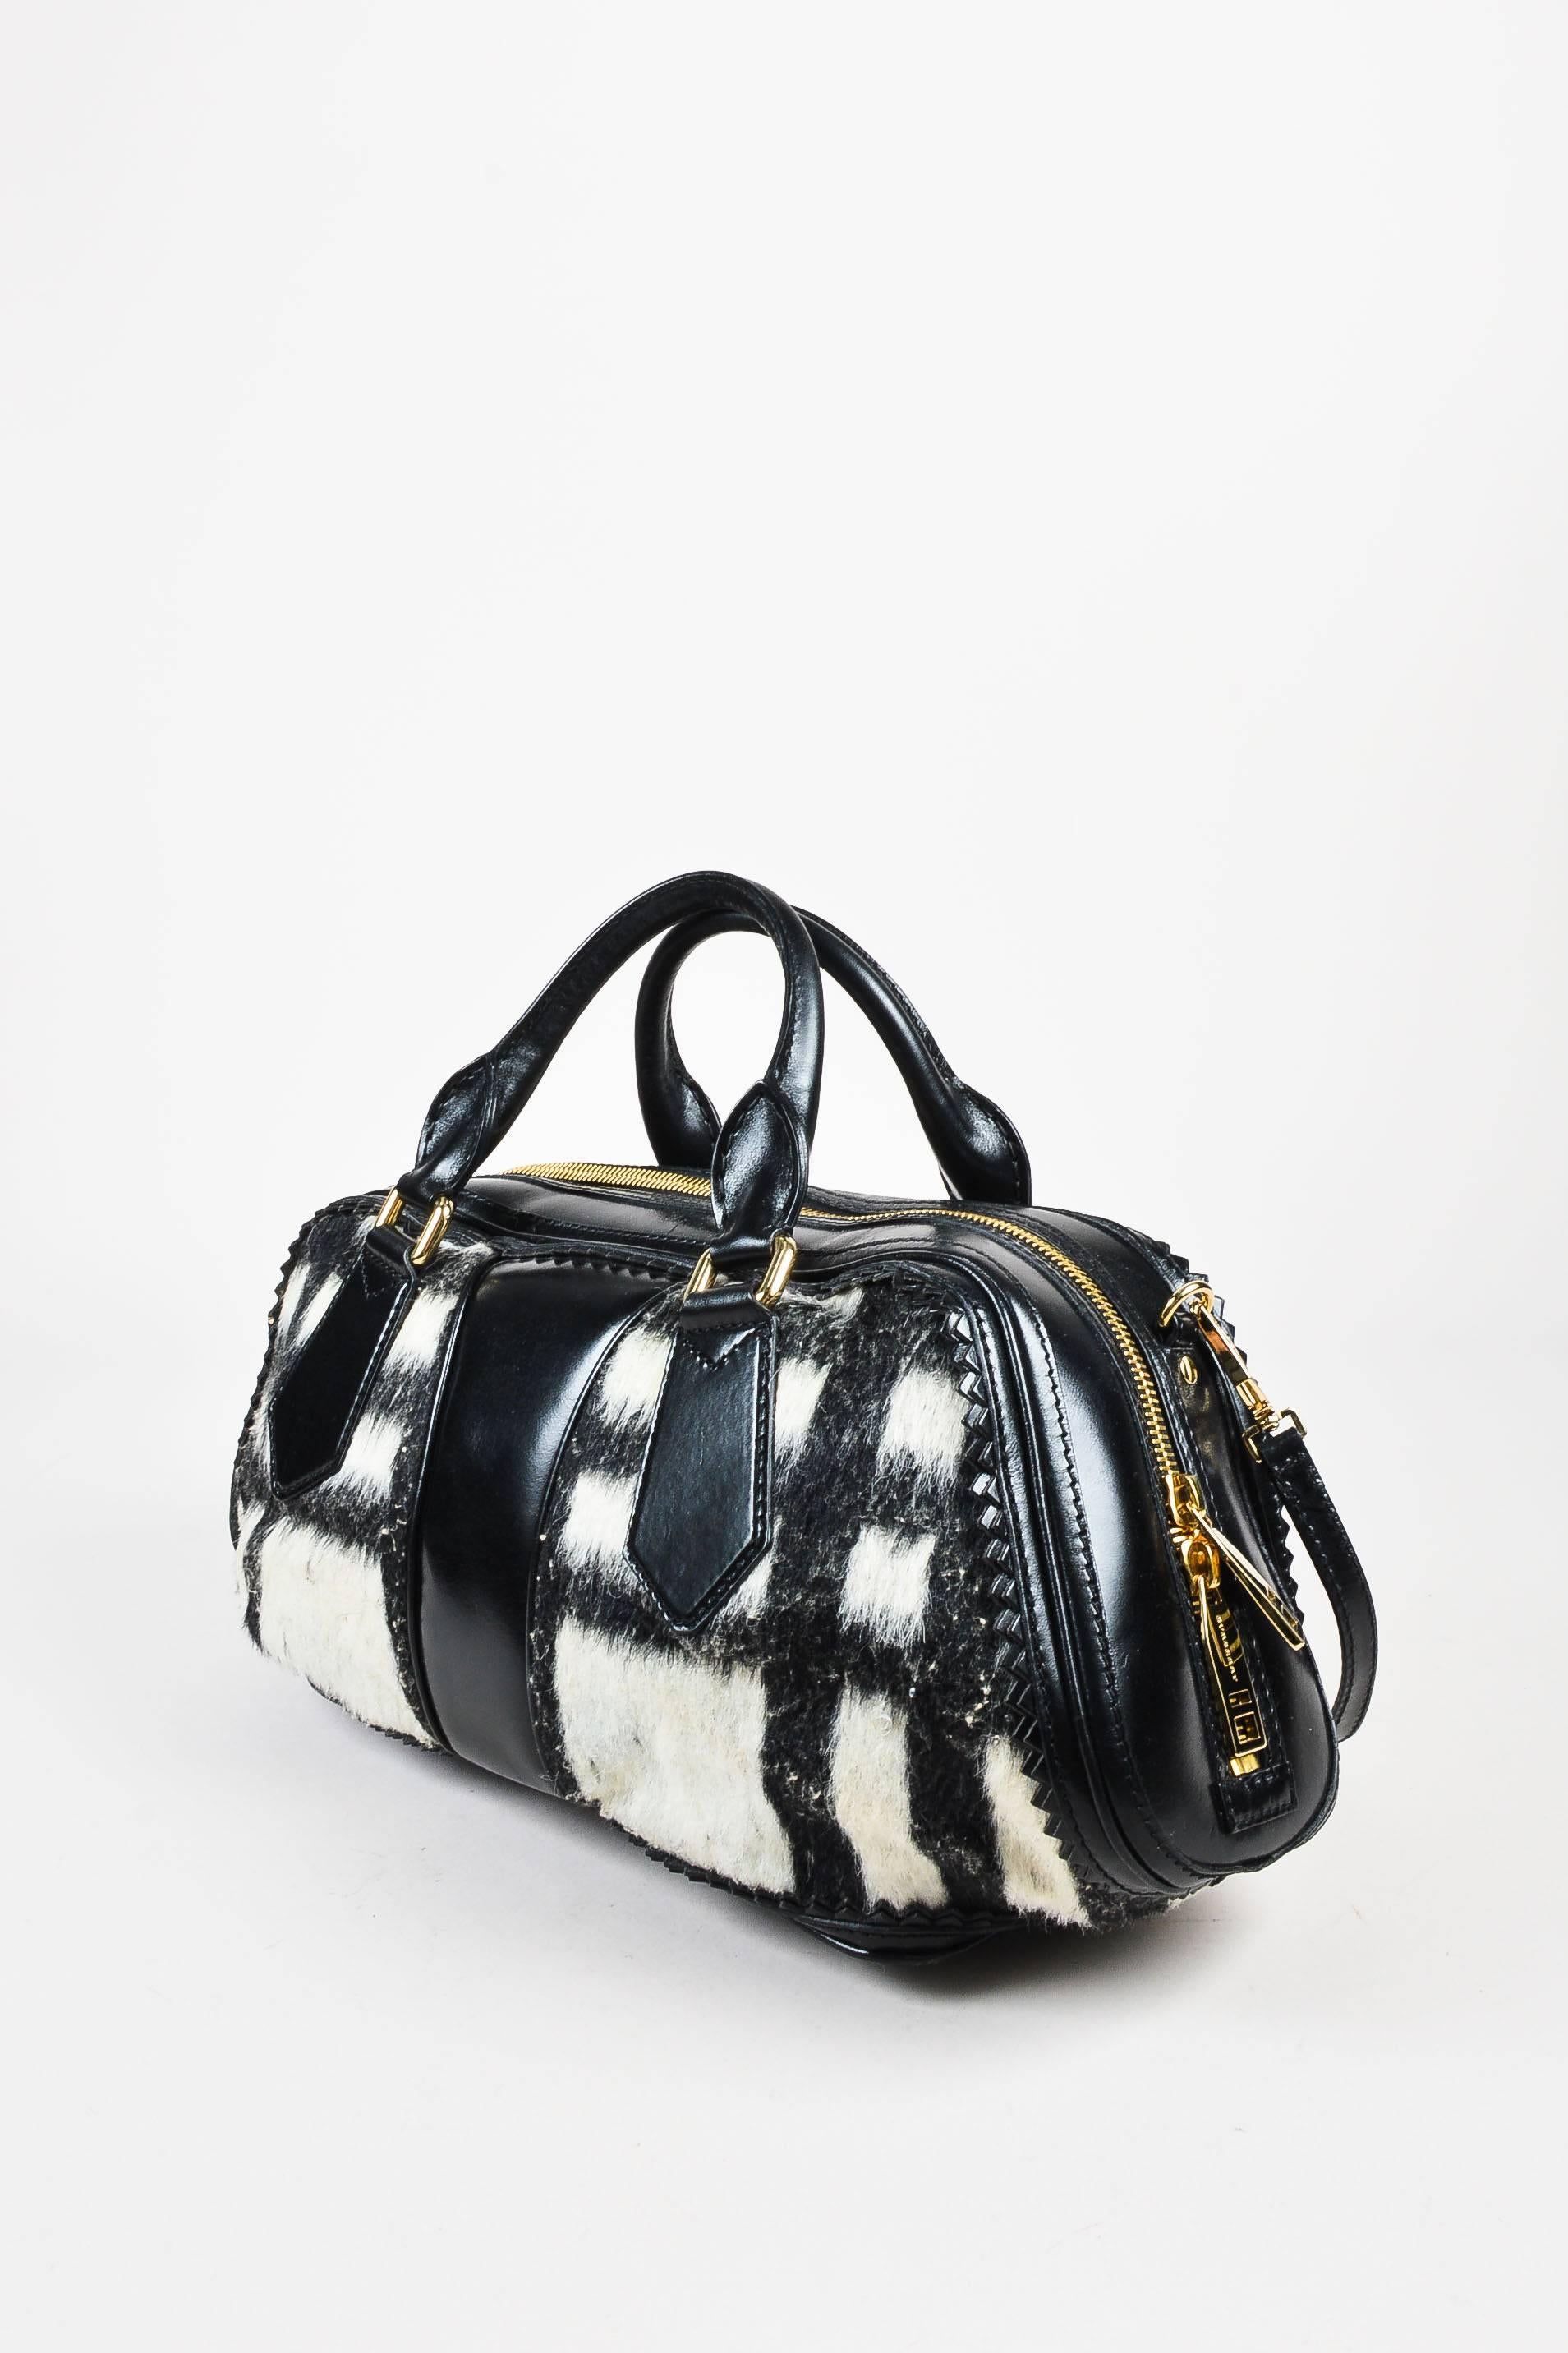 Retails at $2,495. Black and white wool bowling bag from Burberry Prorsum features a black leather trim. Gold-tone hardware details. Oversized fringe tassels on the front. Triangular perforated edges. Two rounded handles and a removable strap for